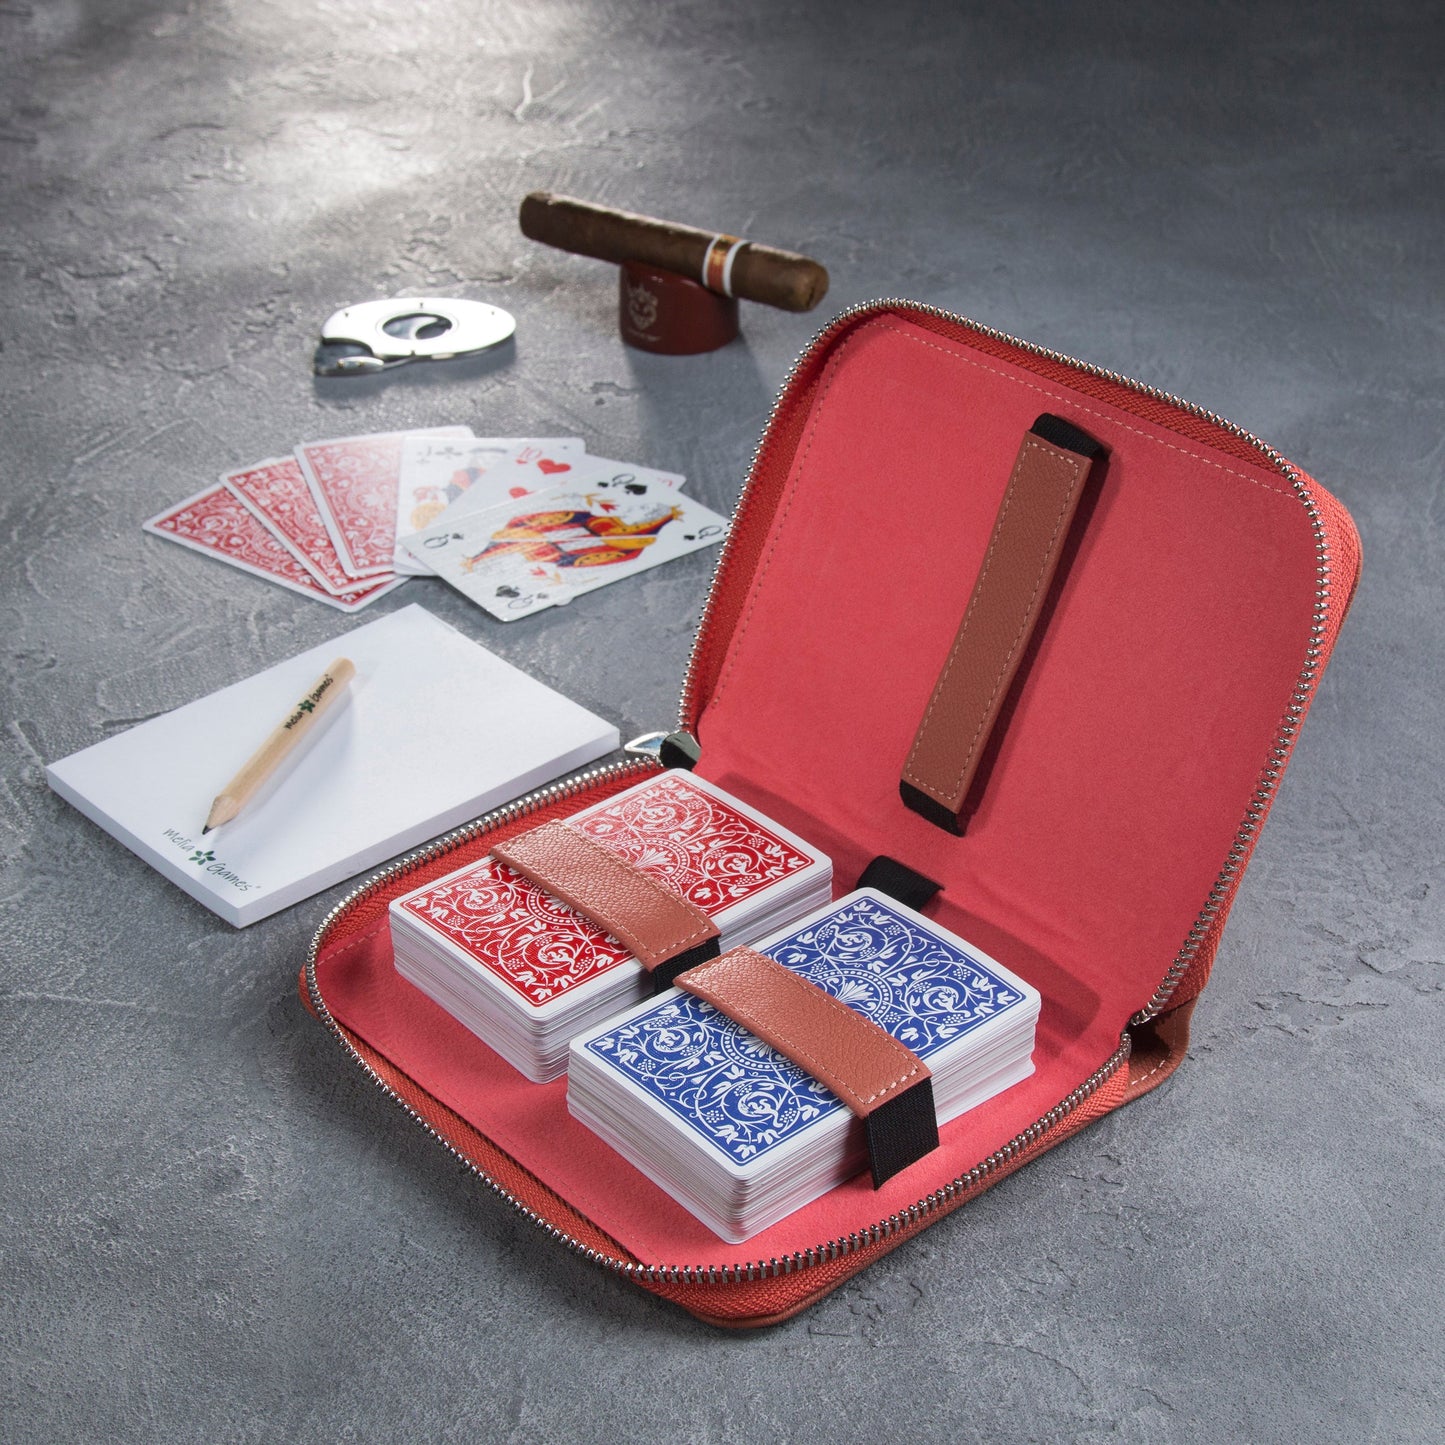 Playing Cards Set Deluxe - Designer Edition - Coral Red